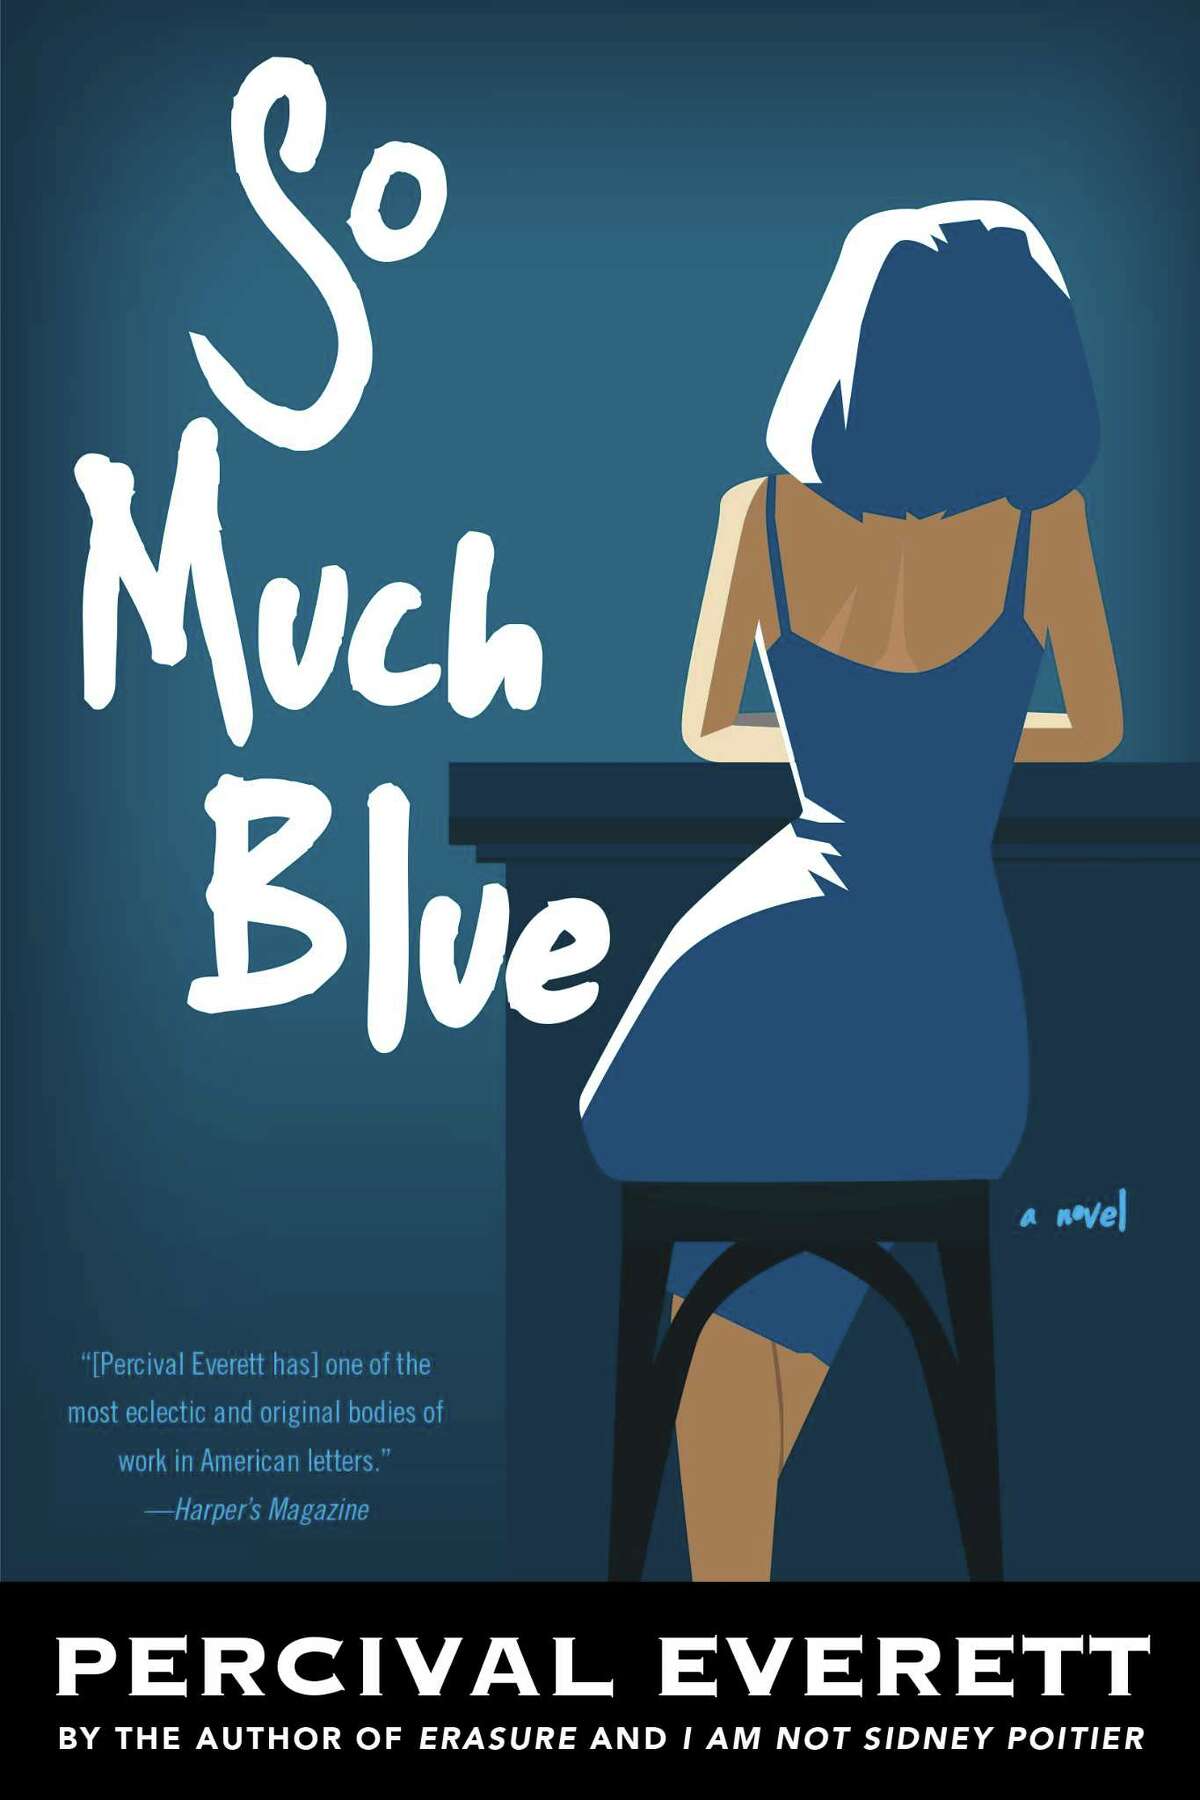 "So Much Blue" by Percival Everett